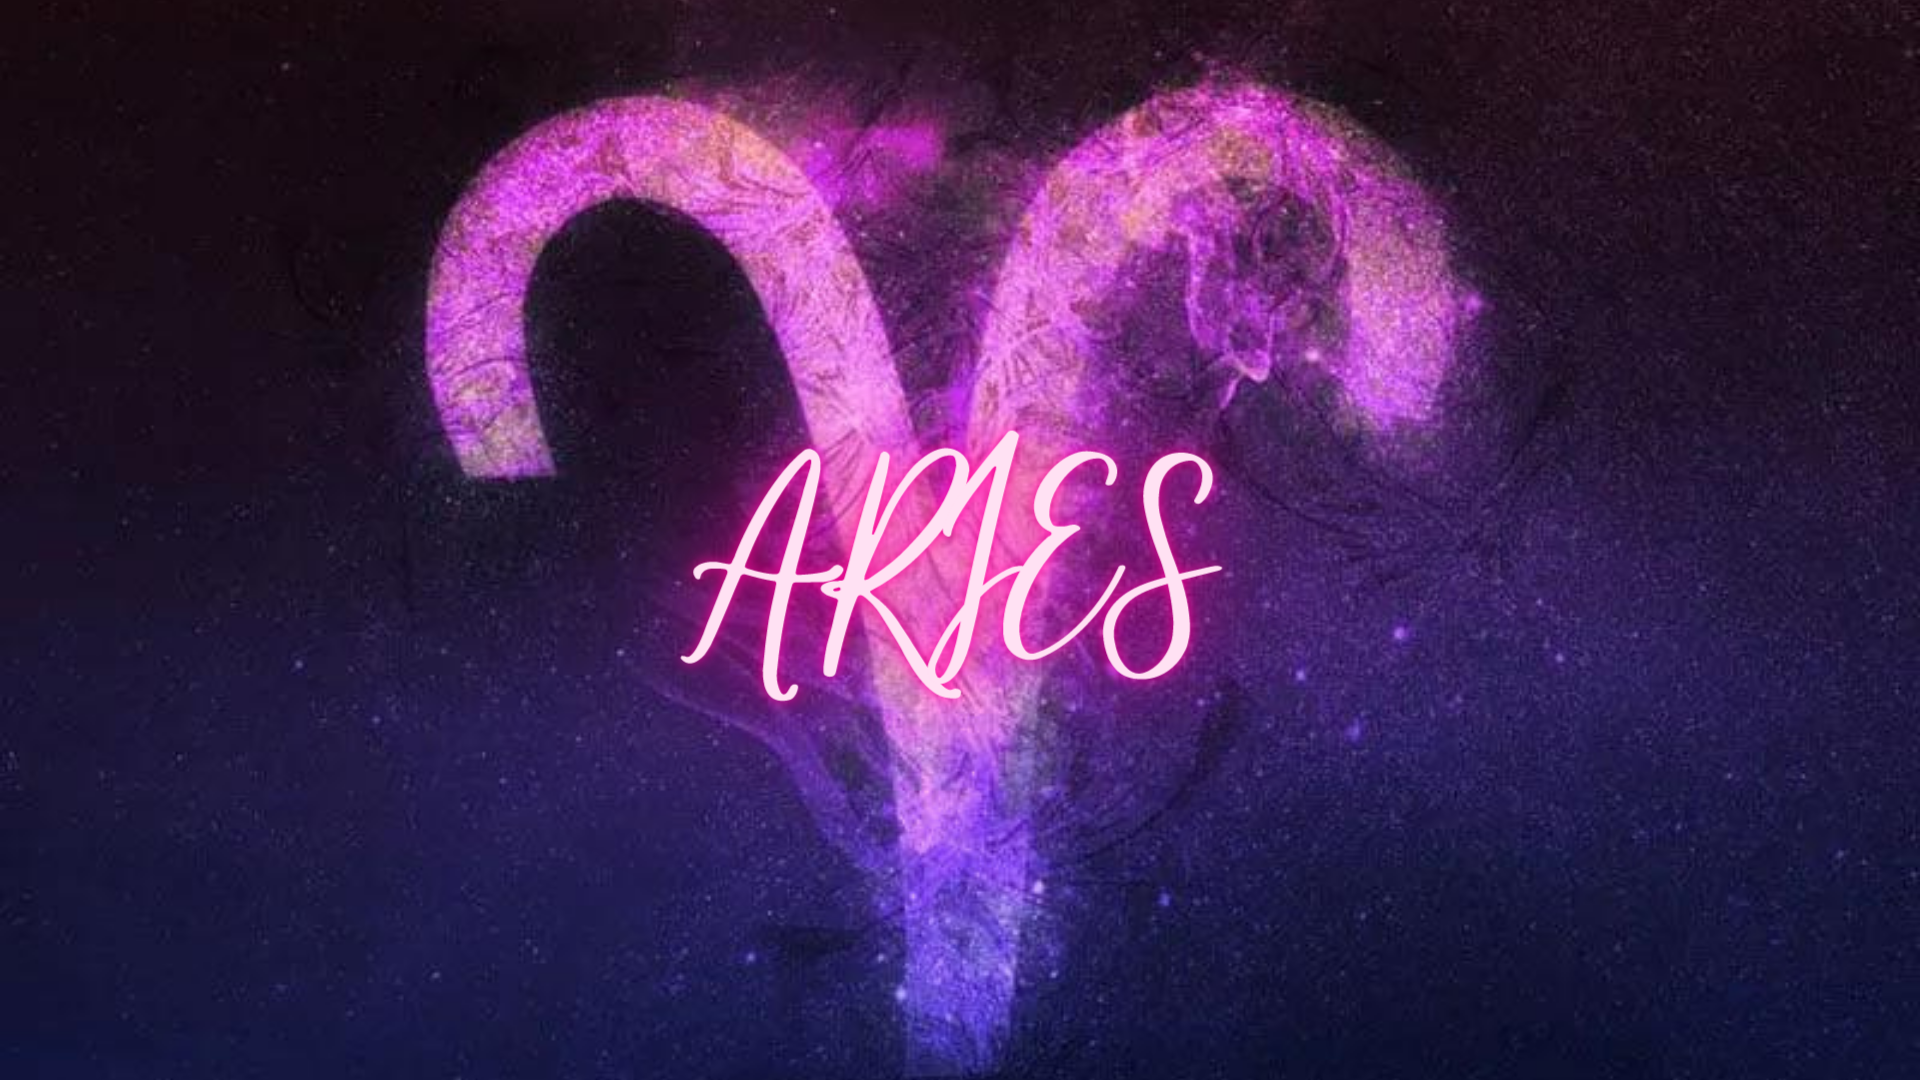 Aries sign in galaxy background